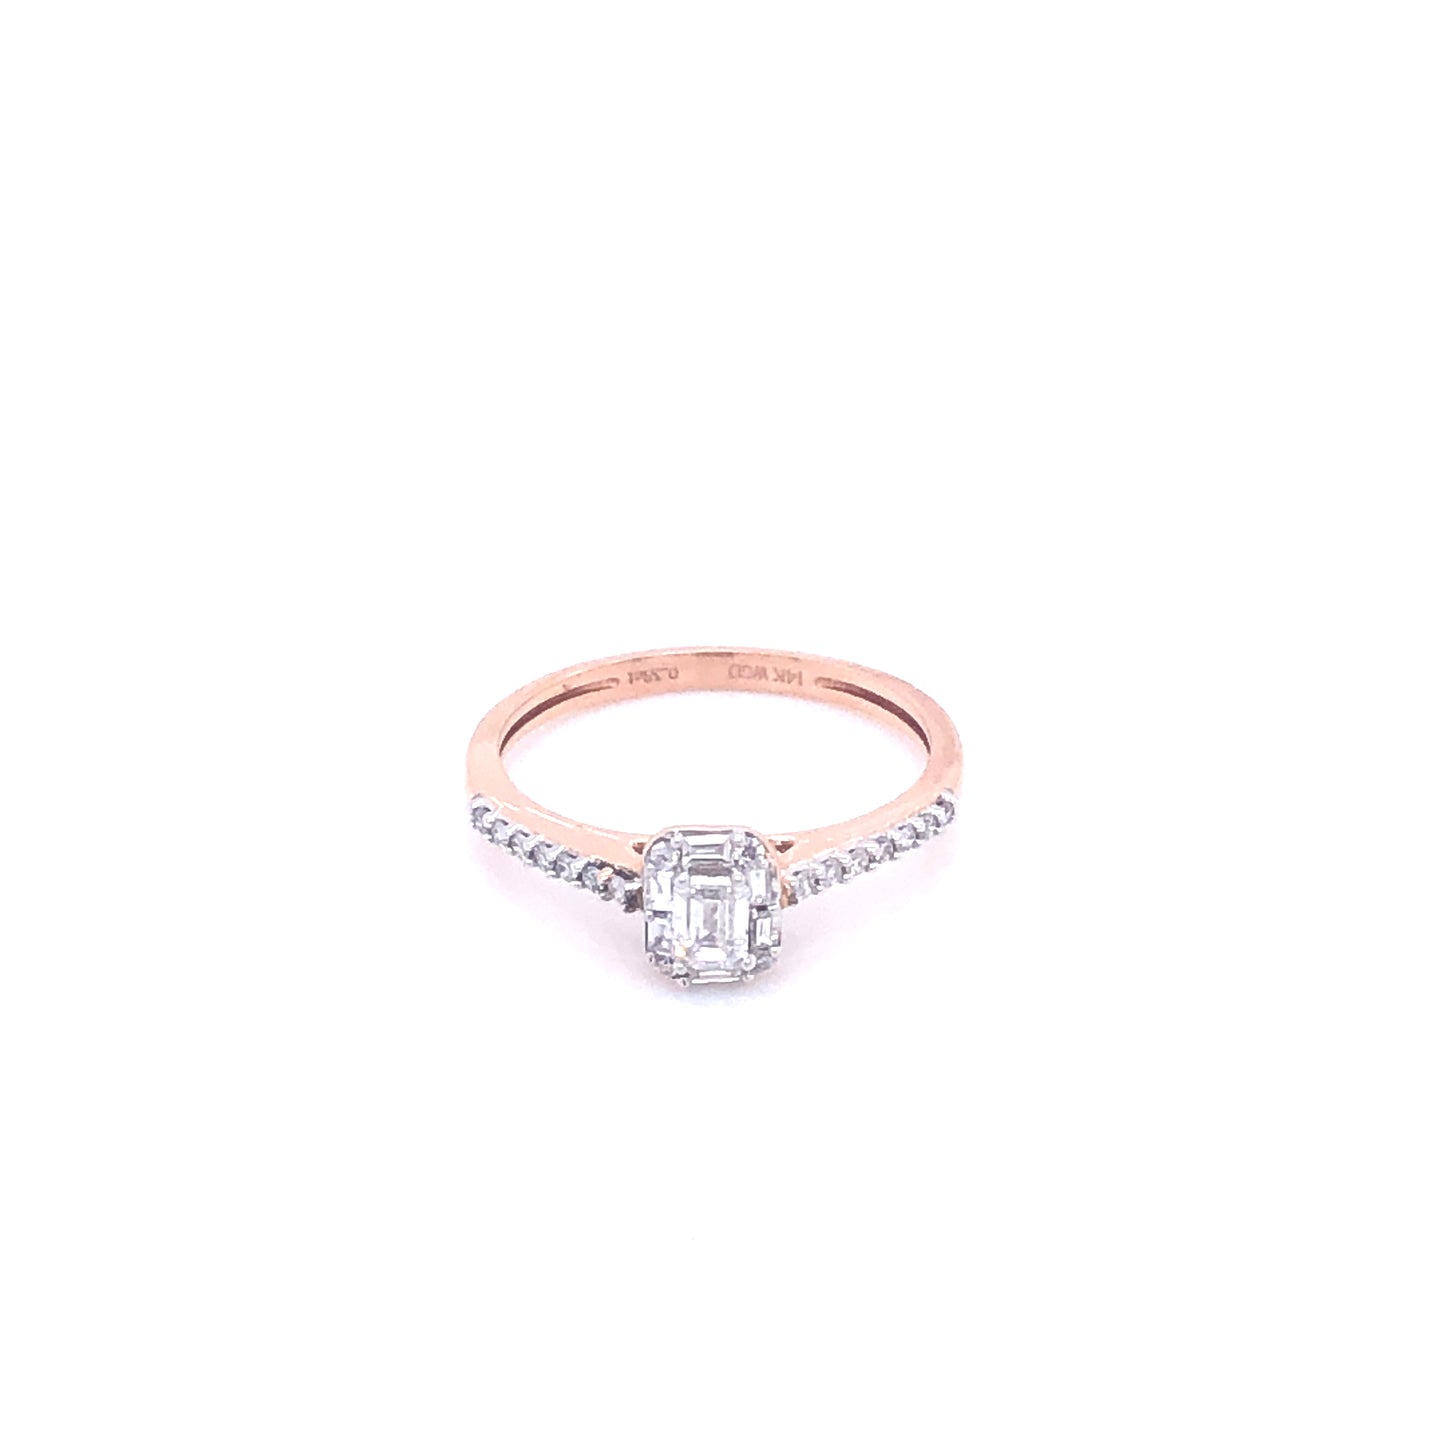 14K DIAMOND Emerald-Shaped with Emerald Cut Diamonds Rose Gold Engagement Ring | Luby Diamond Collection | Luby 